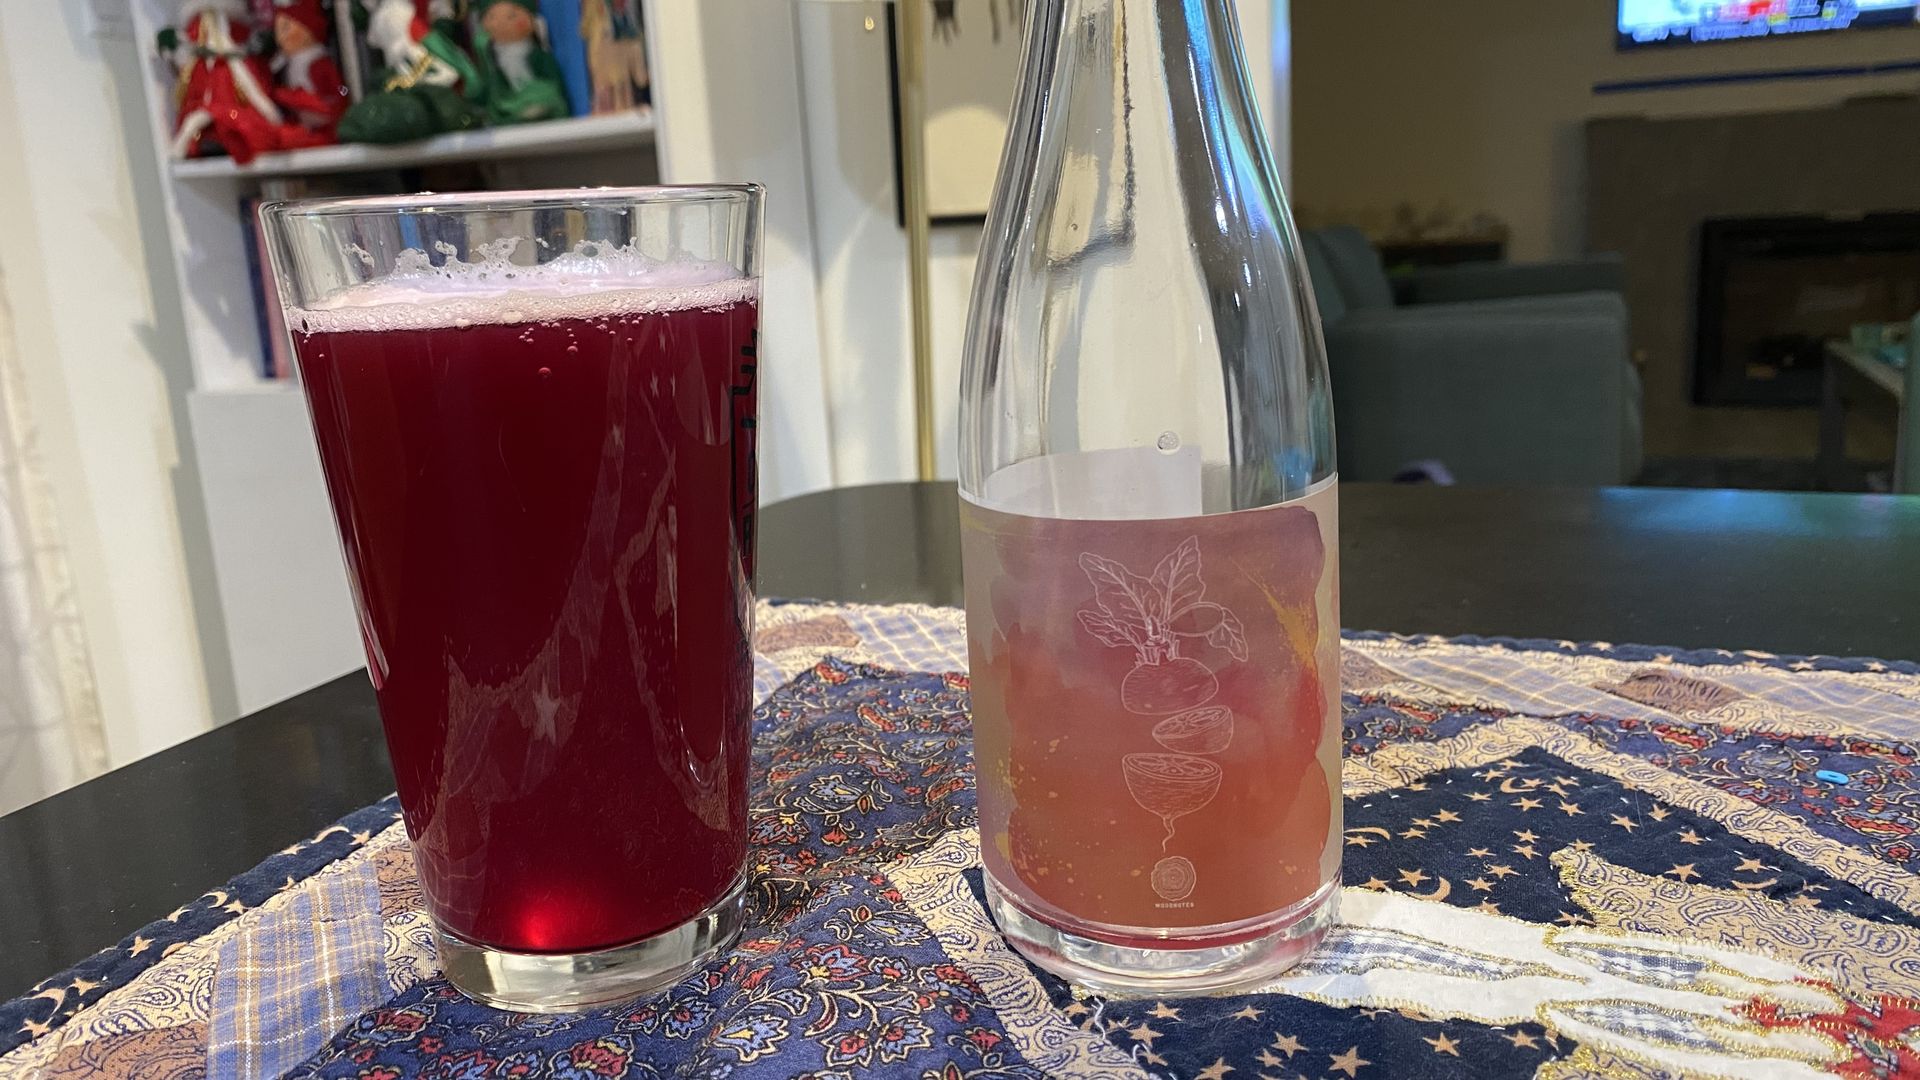 A pint glass of bright magenta liquid and a clear empty beer bottle.